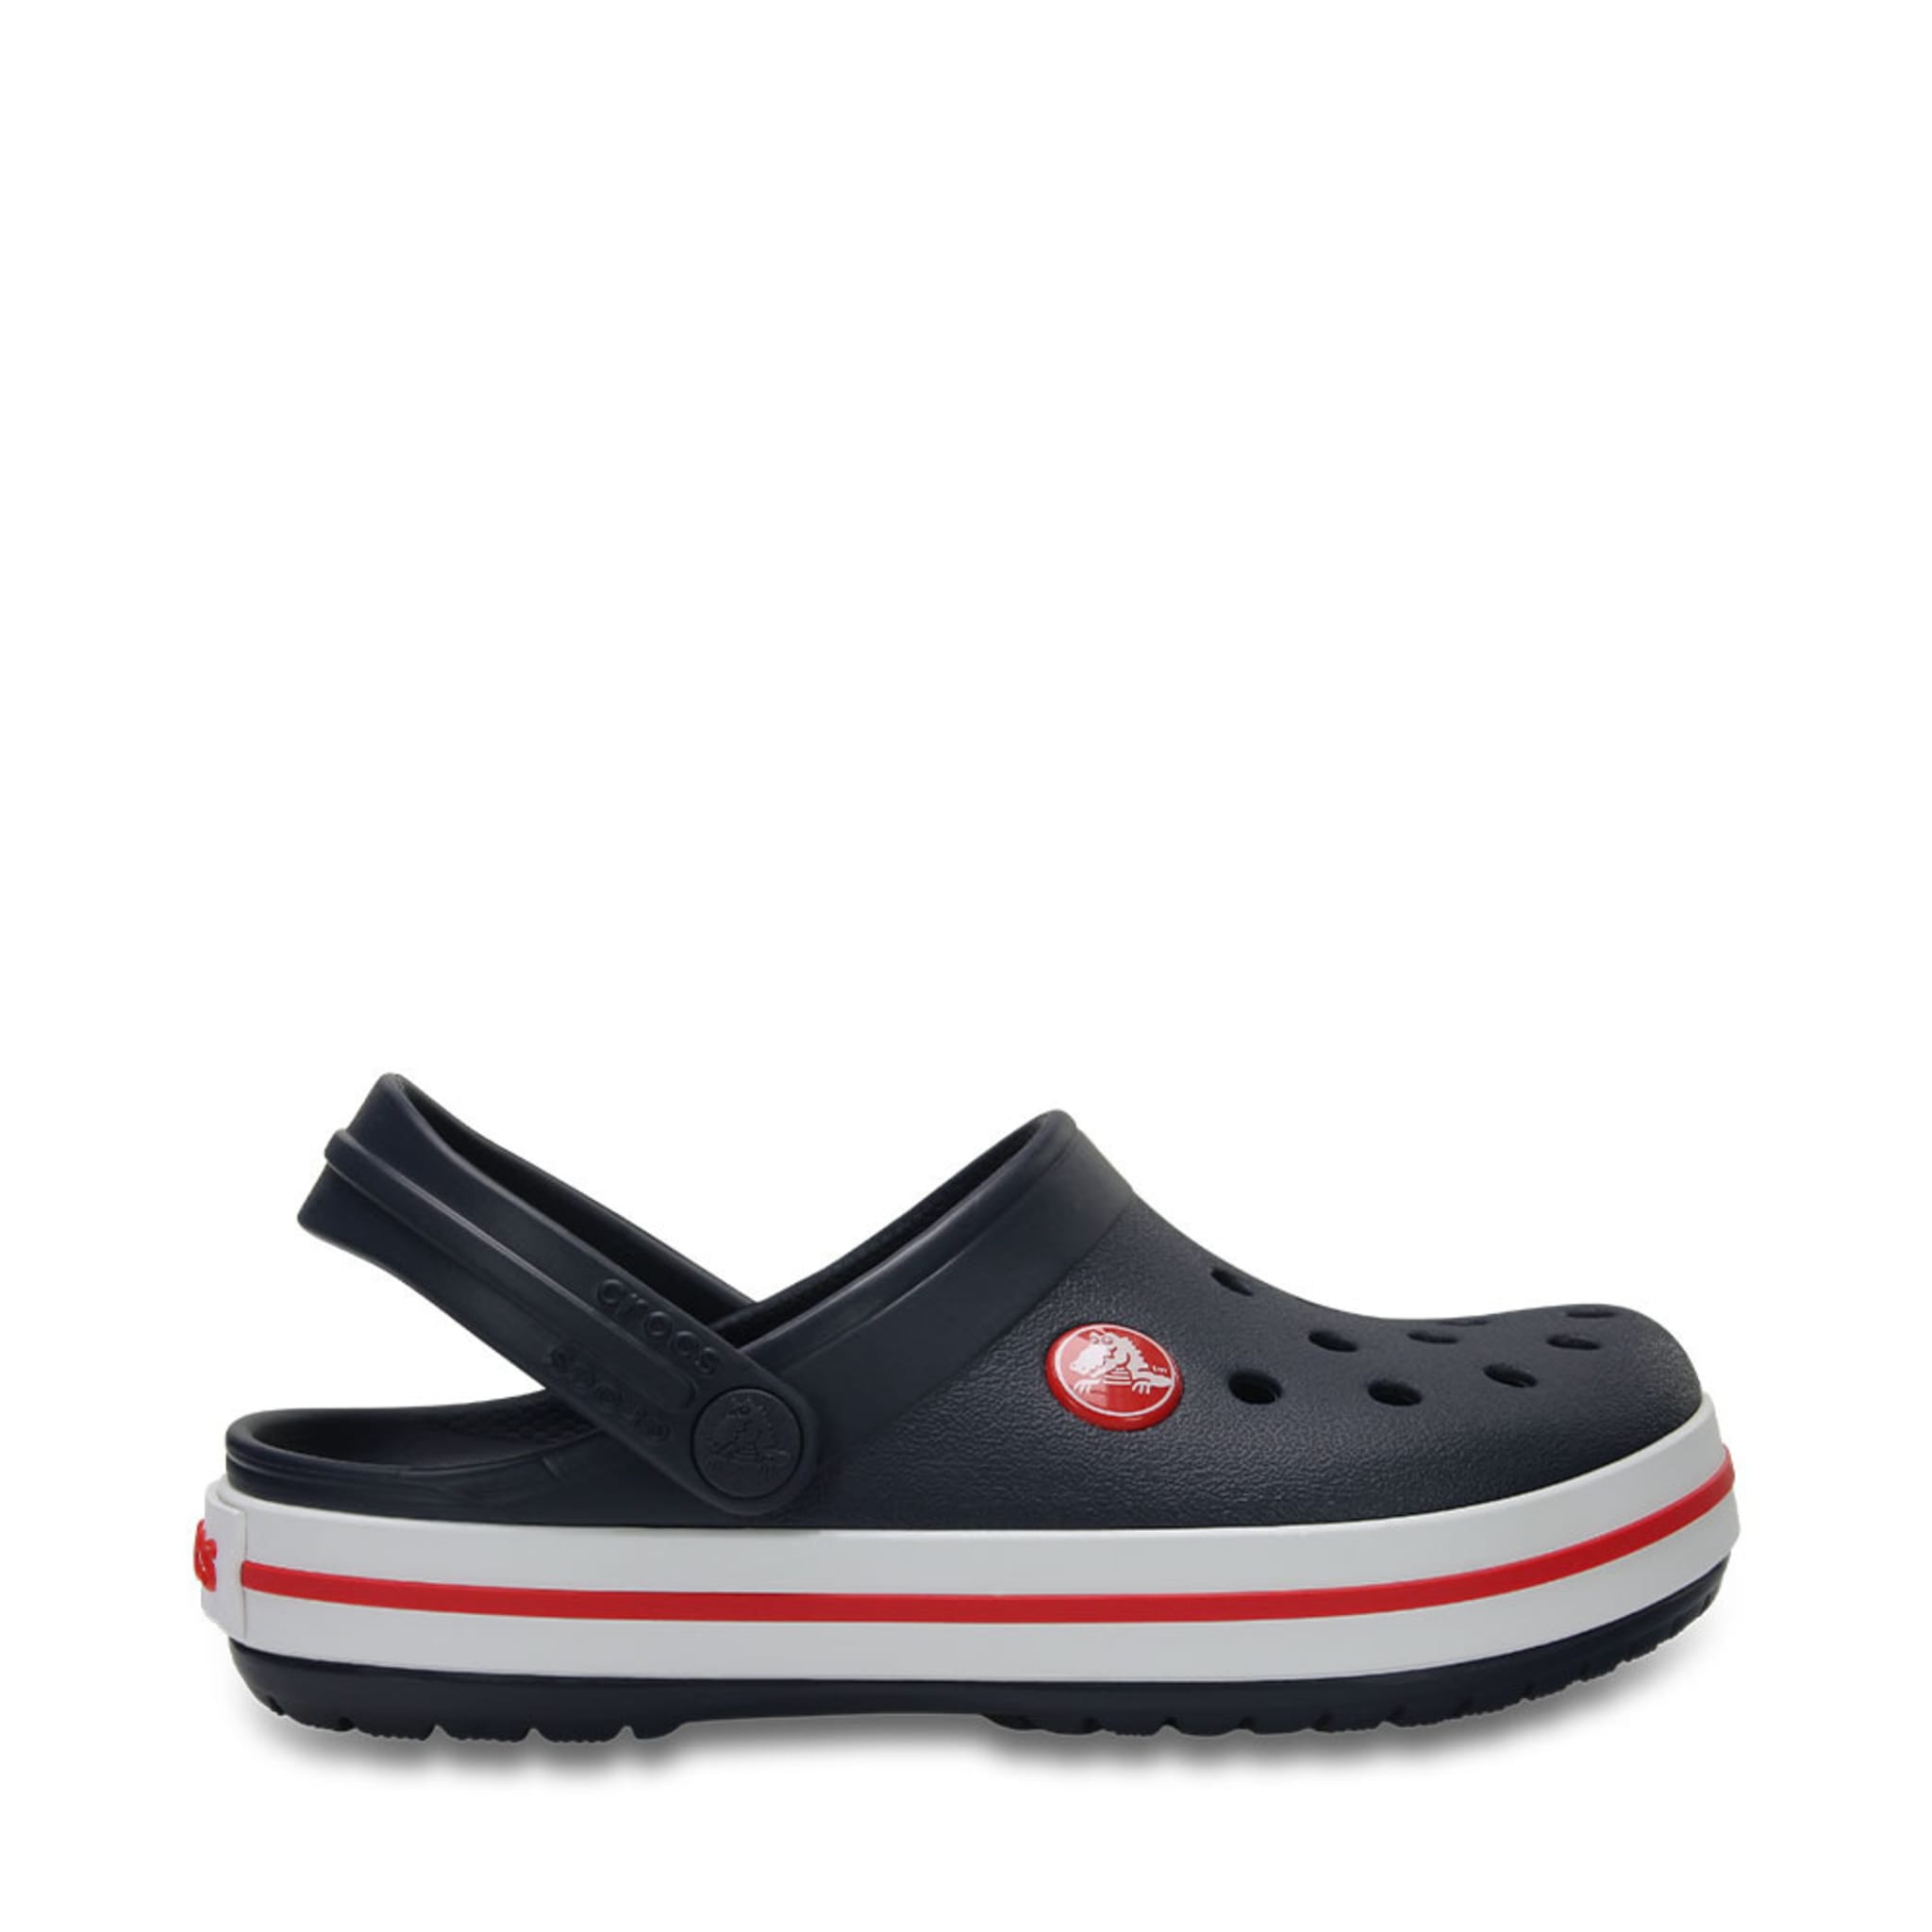 Crocband Clog T, Navy/Red